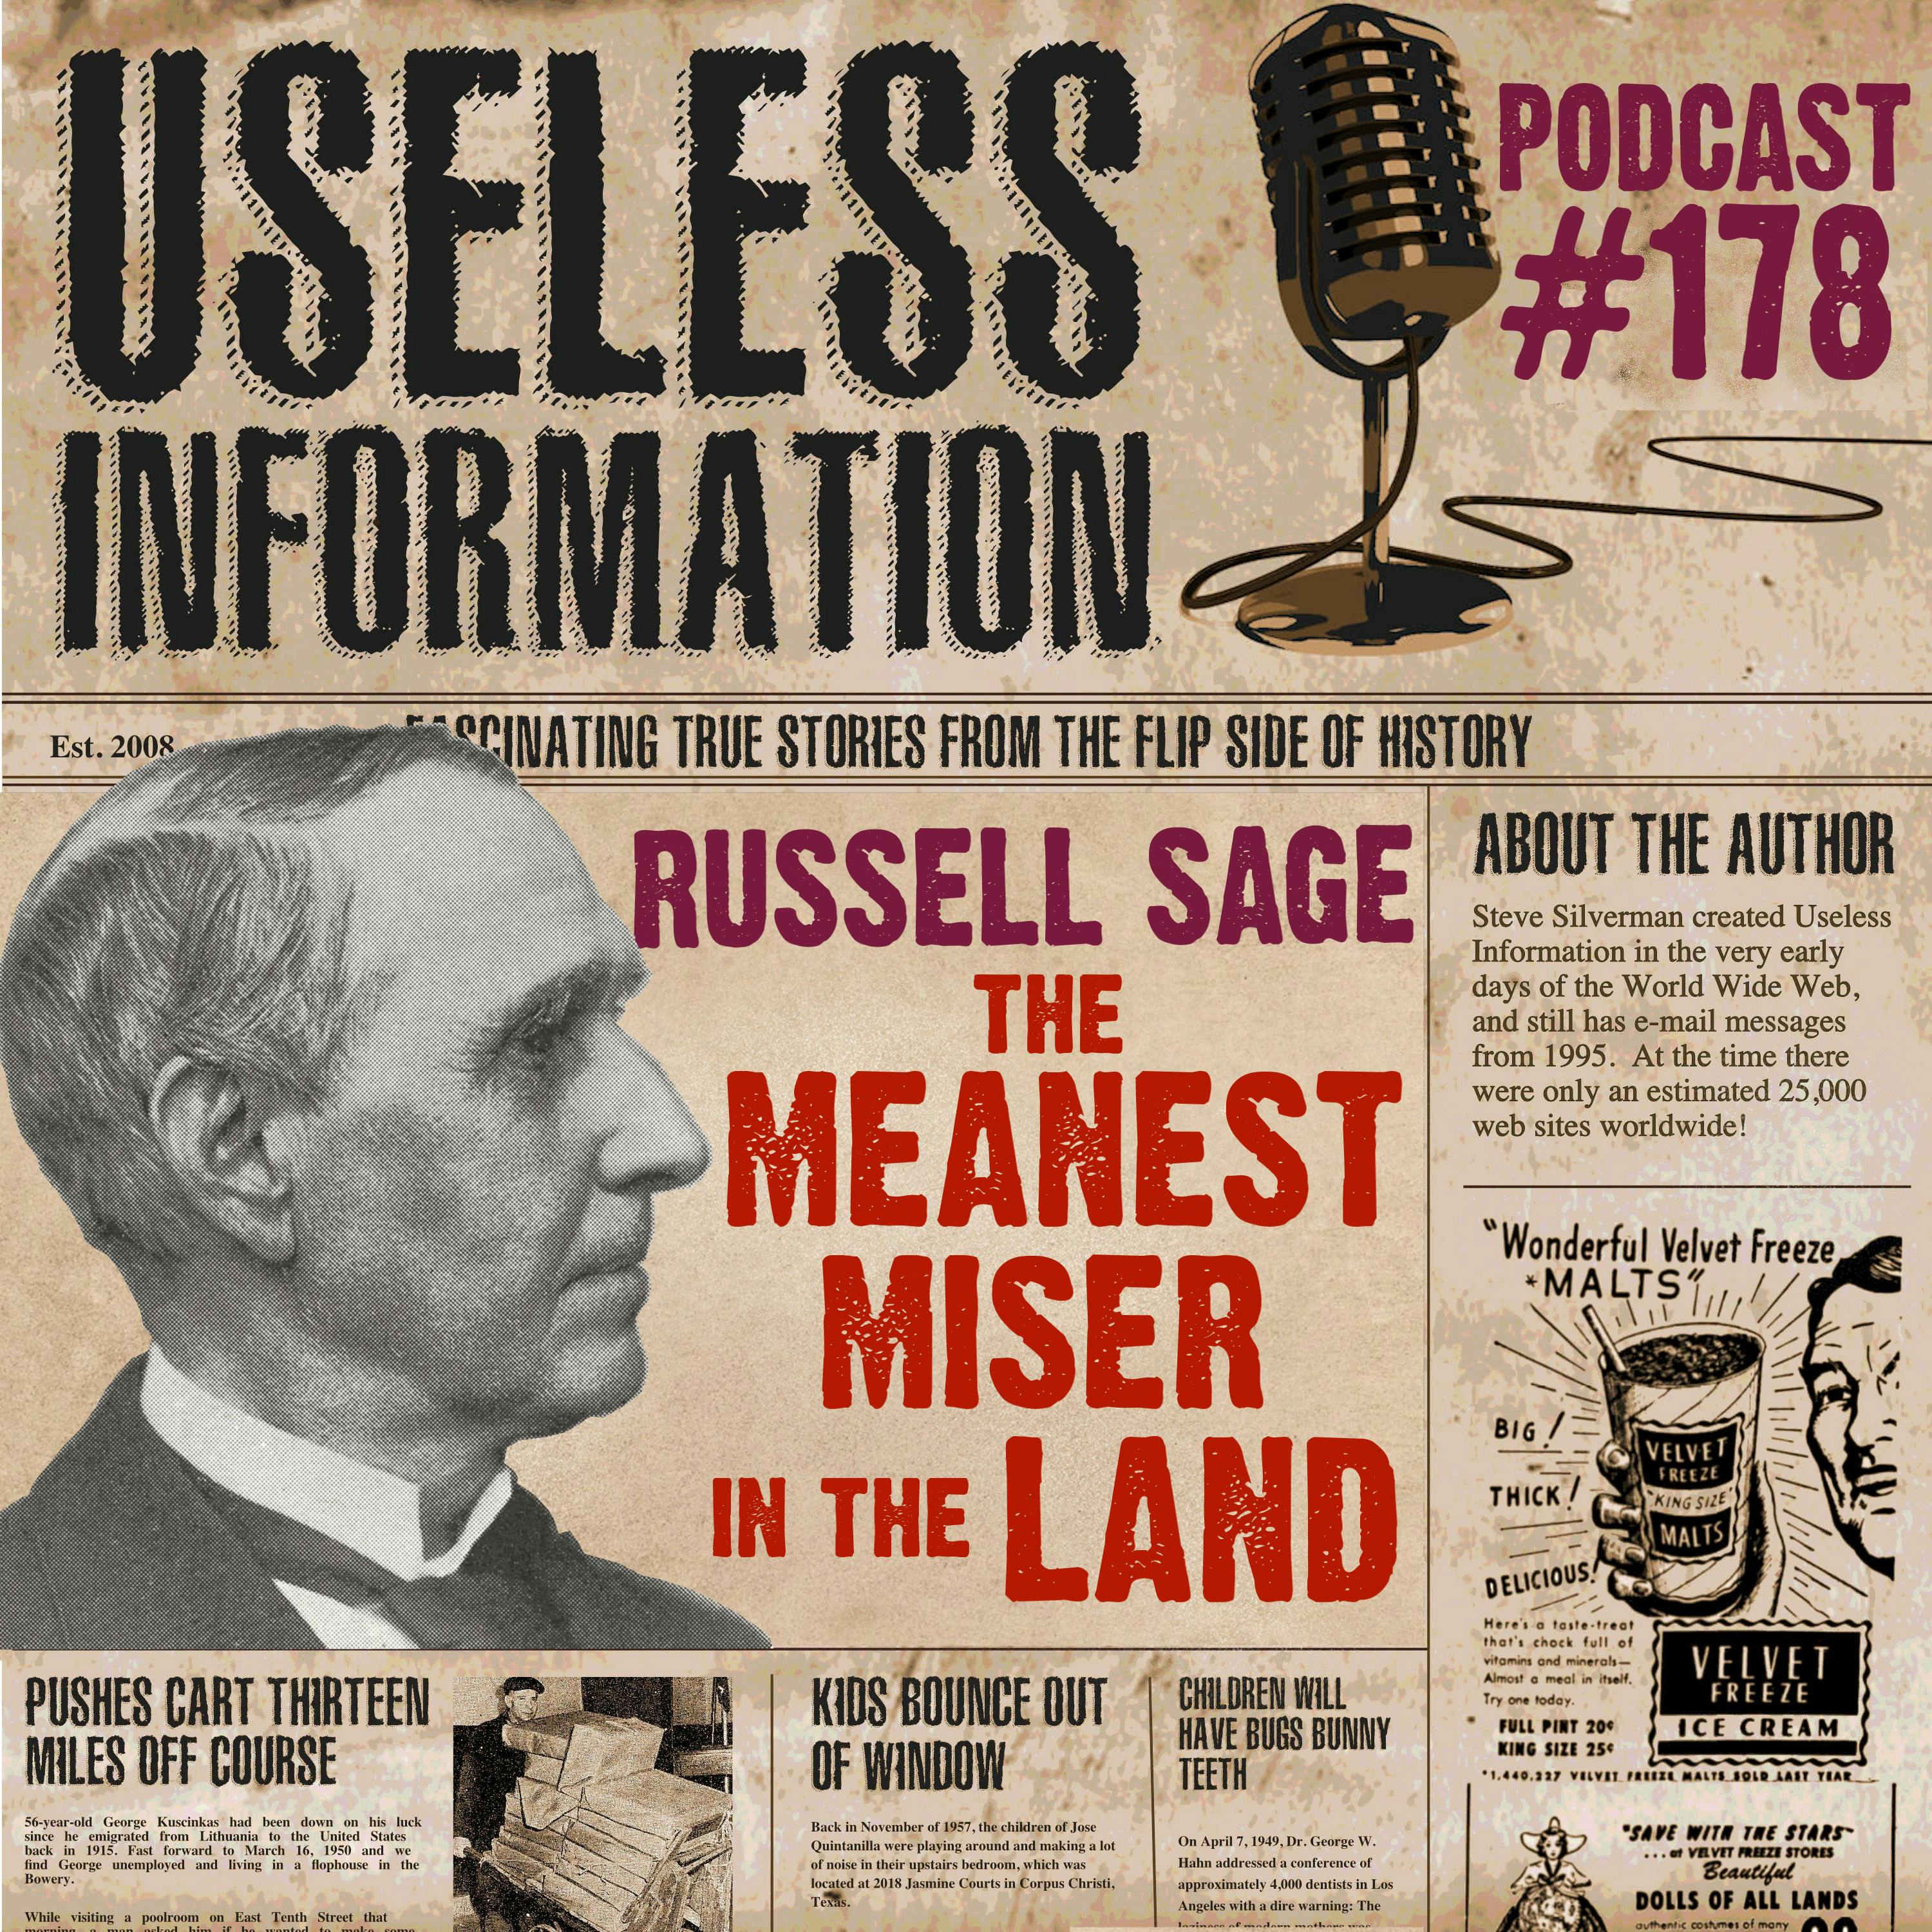 Russell Sage: The Meanest Miser in the Land - UI #178